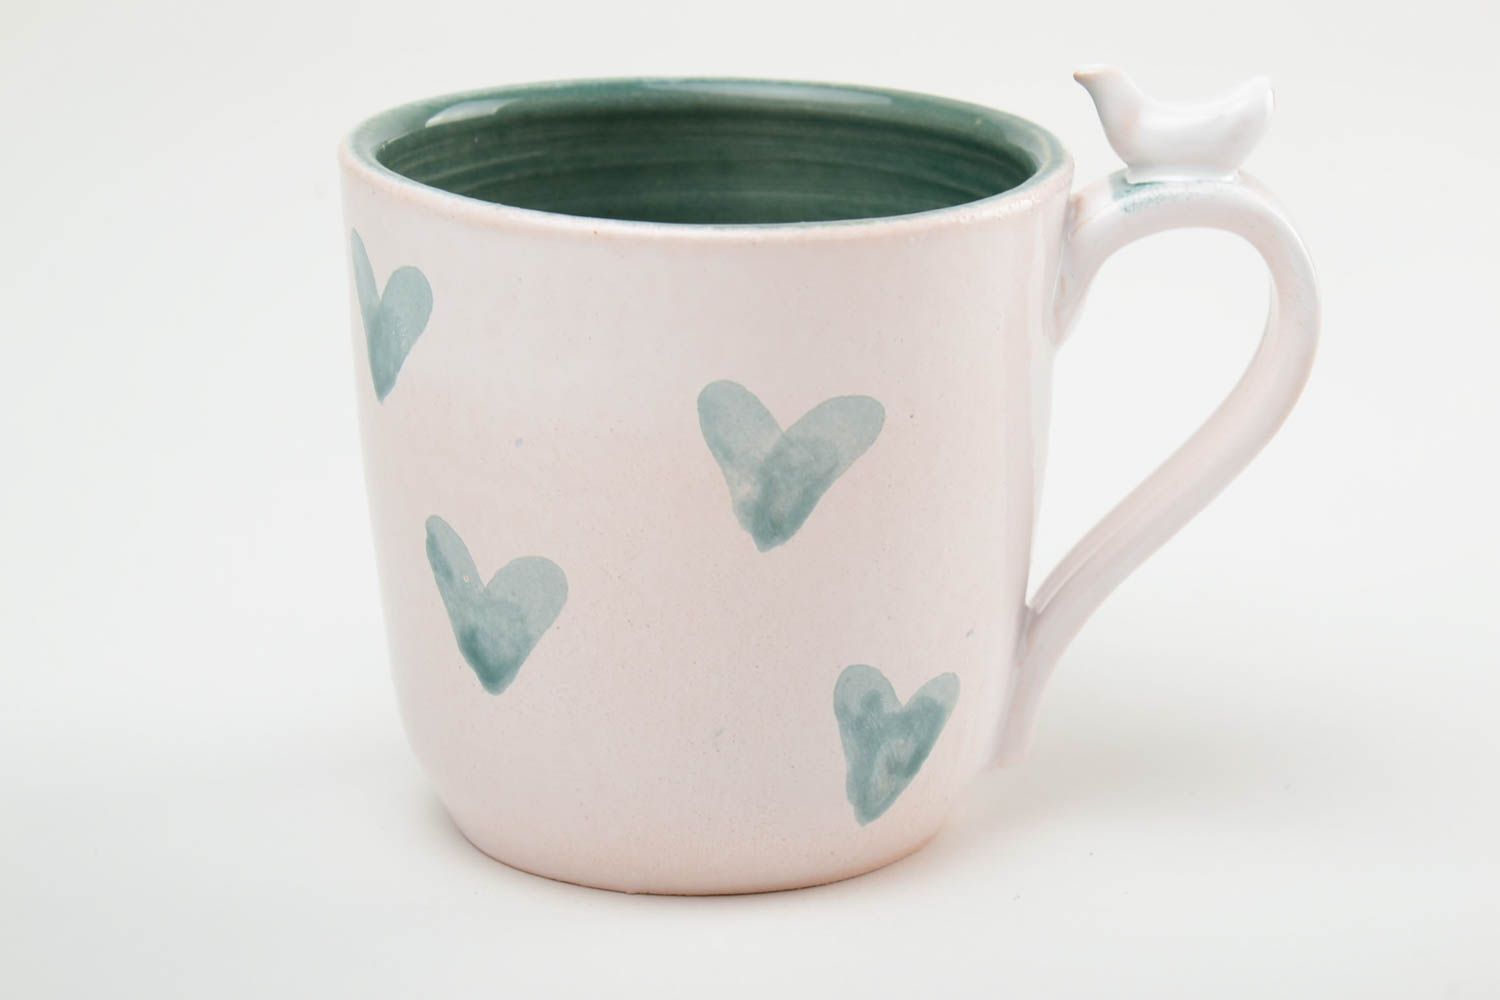 10 oz white and green ceramic cup with handle and green hearts' pattern photo 3